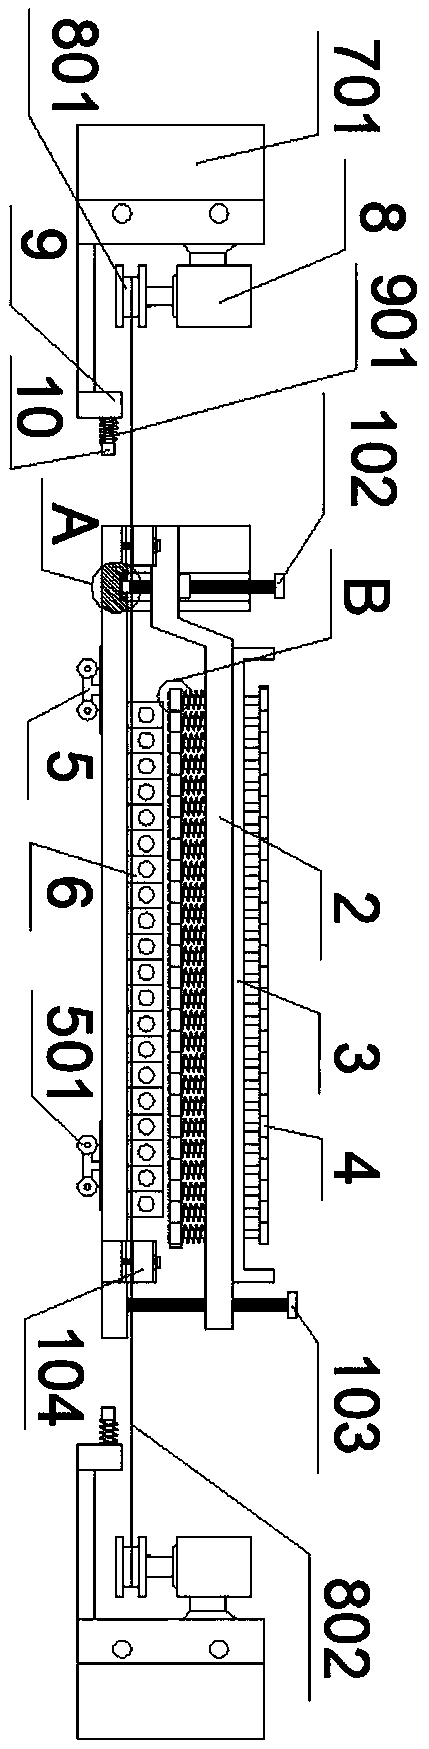 Delivery device with clamping function for production of electronic connectors